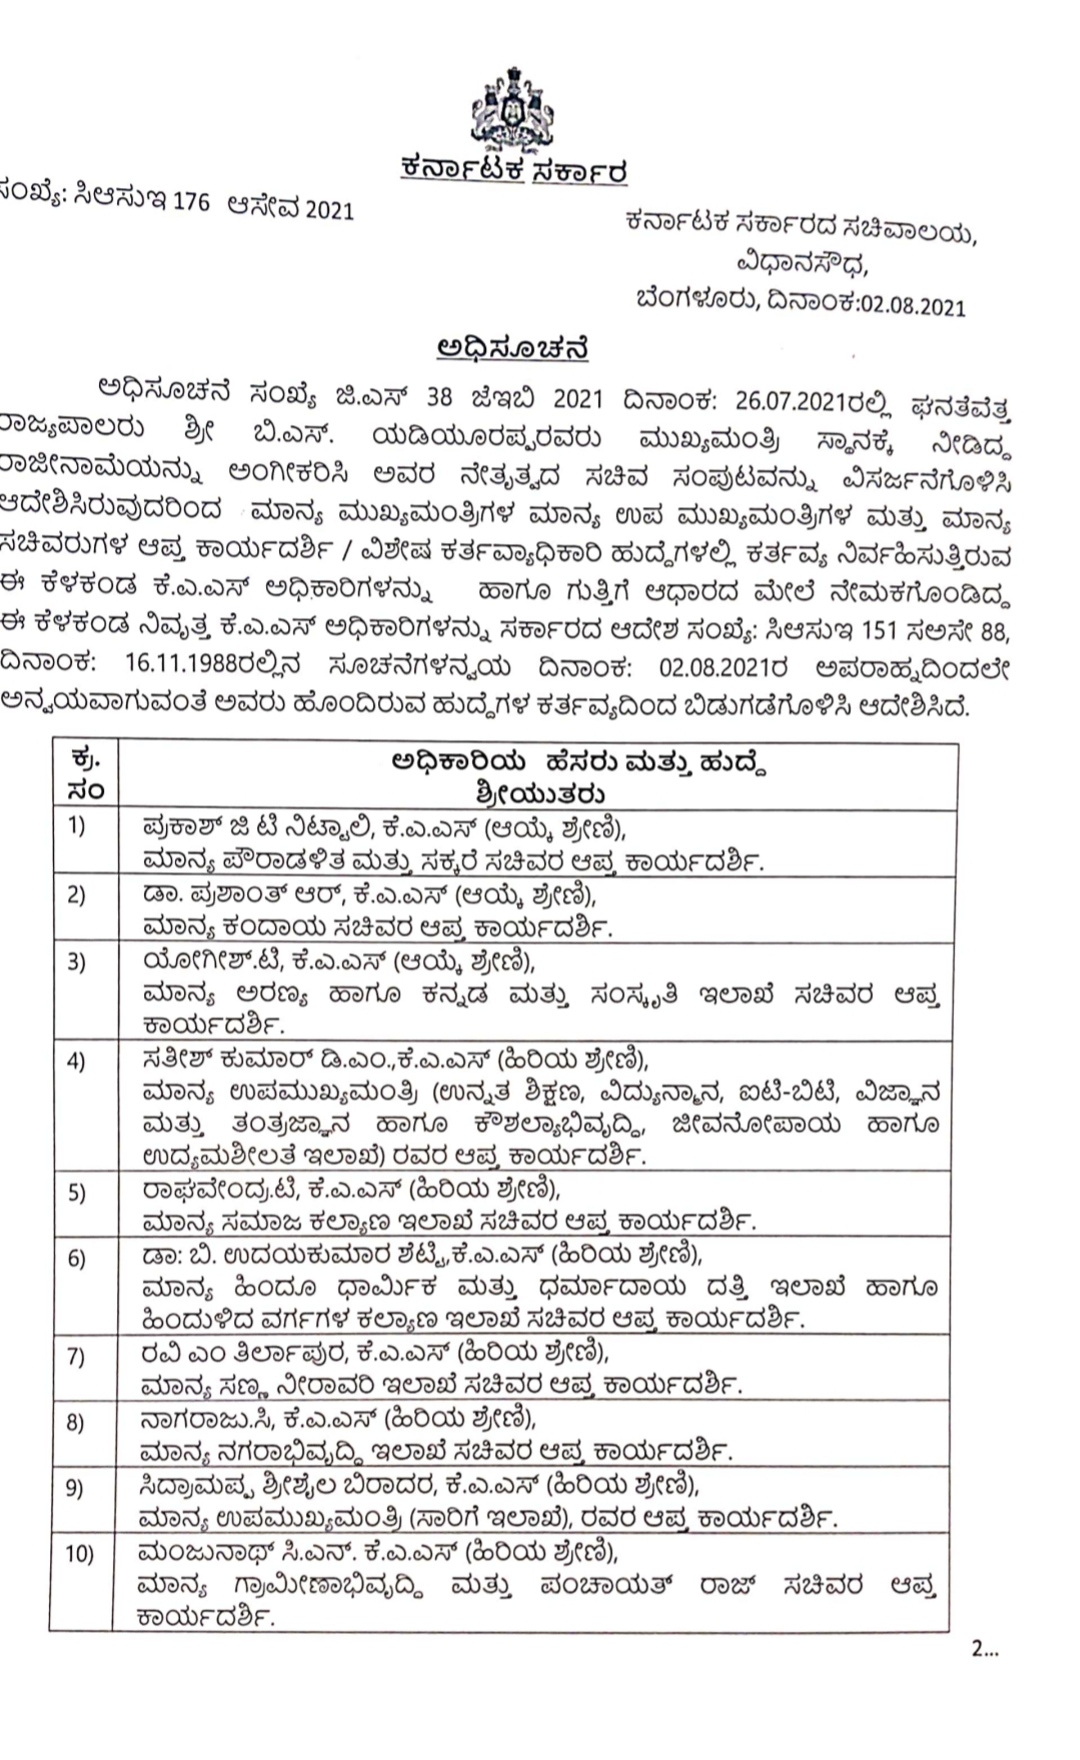 Release order of staff and officers appointed by BSY